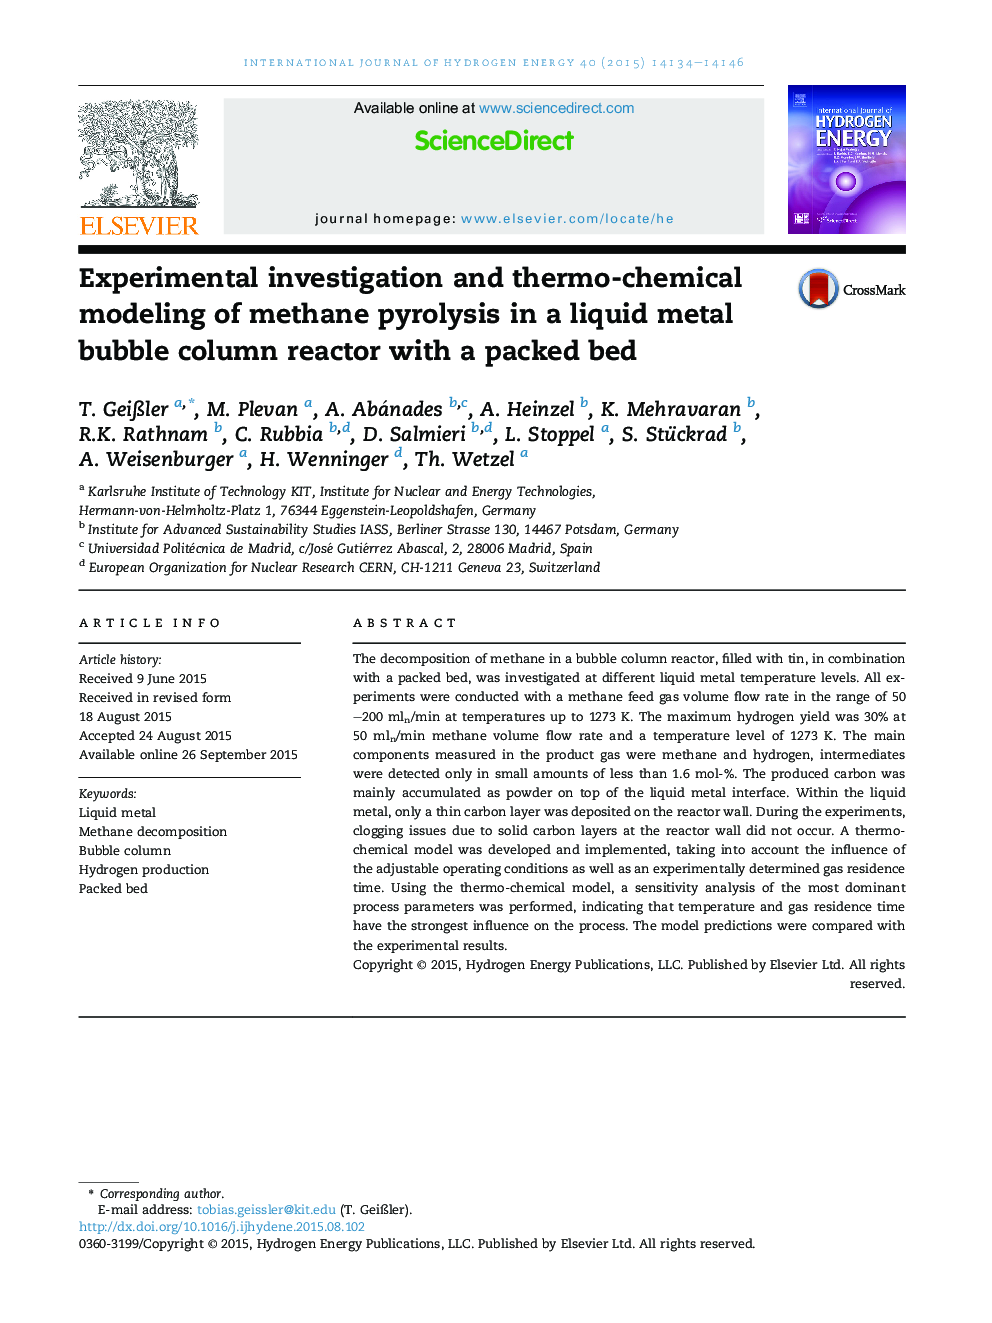 Experimental investigation and thermo-chemical modeling of methane pyrolysis in a liquid metal bubble column reactor with a packed bed